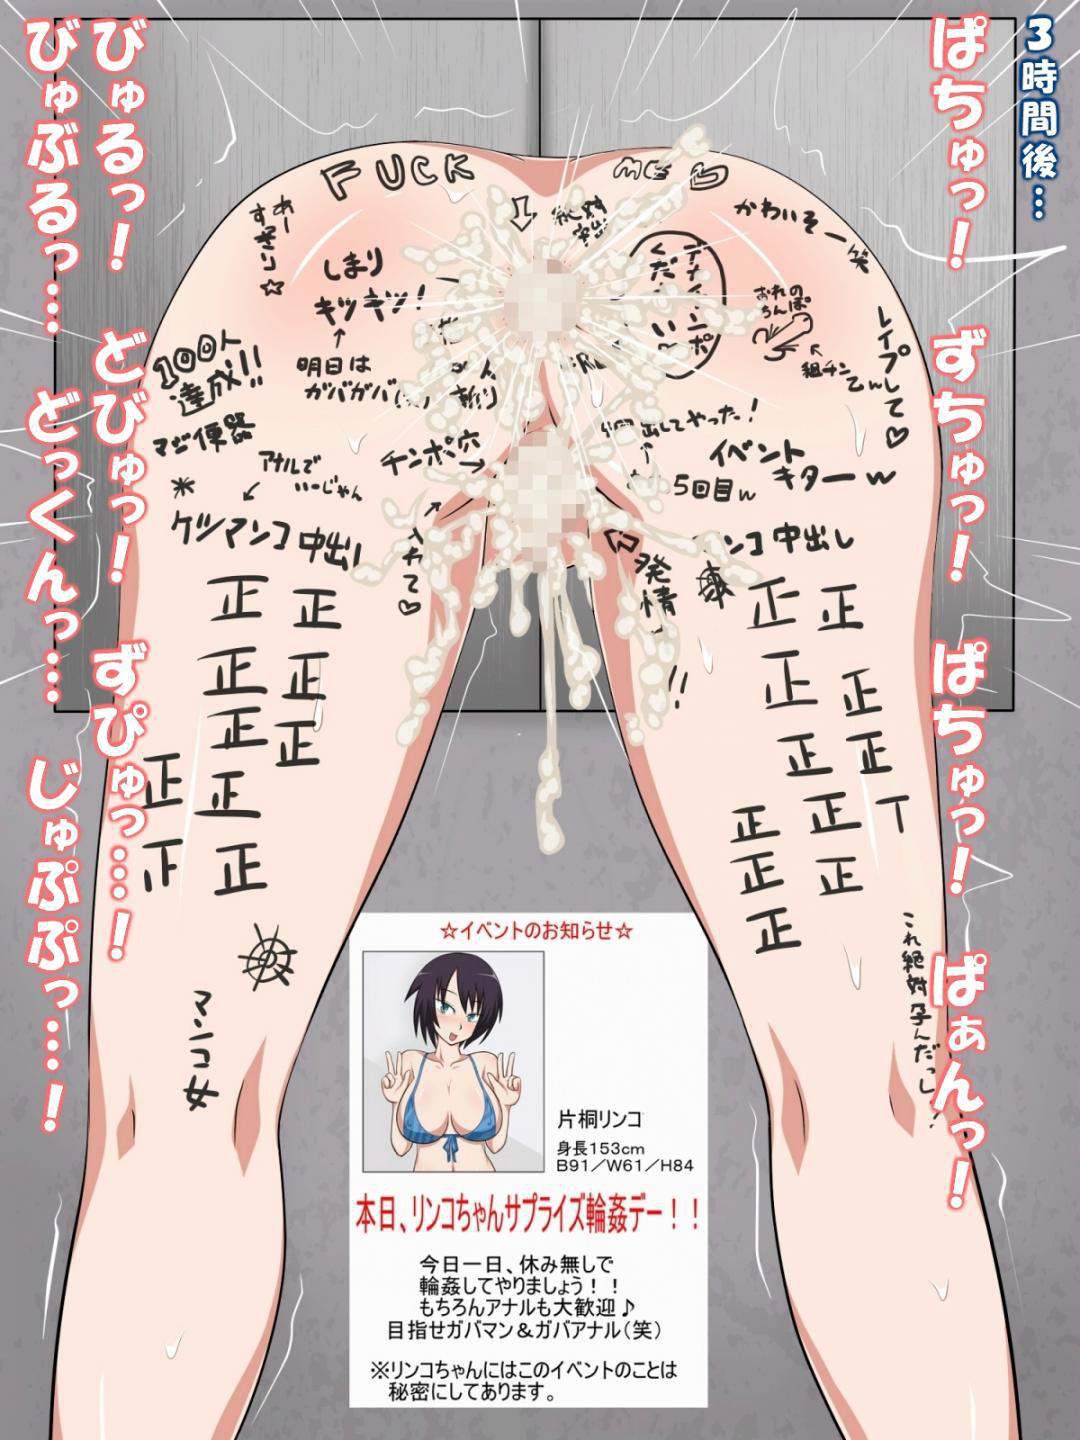 【Conception diagram】Secondary erotic image of a man and a woman whose pregnancy has been confirmed 19